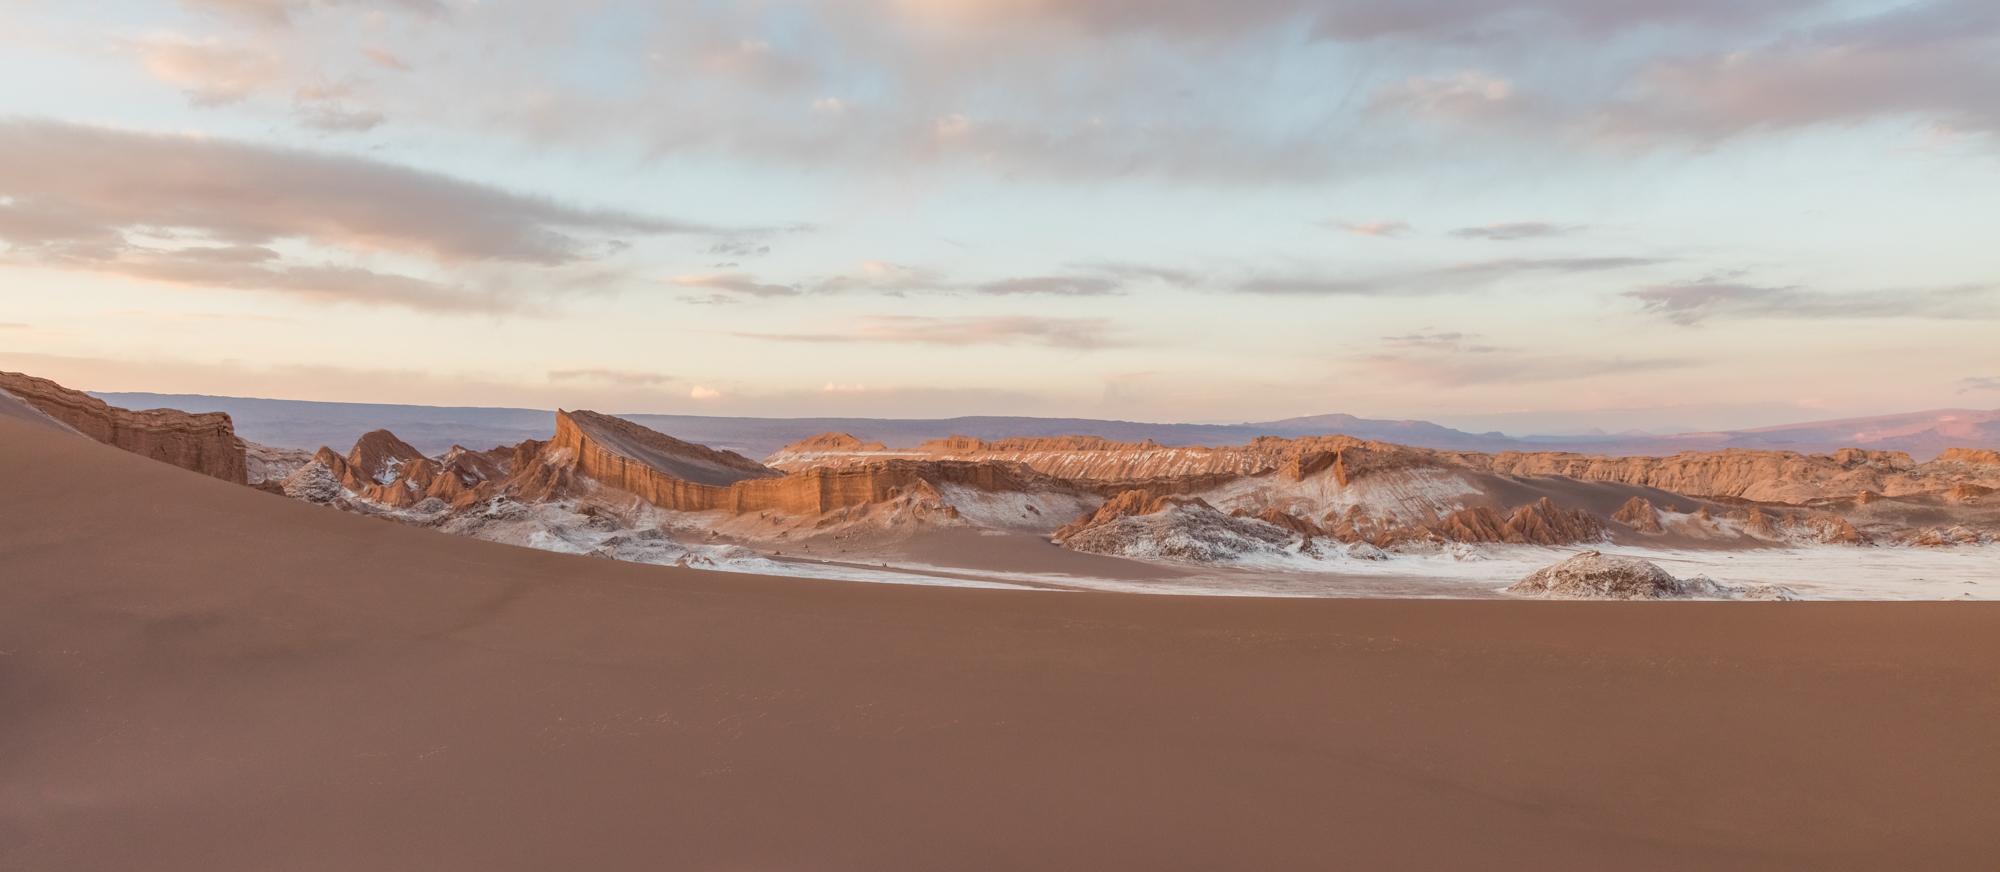 View at dusk of two of the highlights in Valle de la Luna, the Great Dune in the foreground, and the Amphitheater in the background, San Pedro de Atacama, northern Chile.